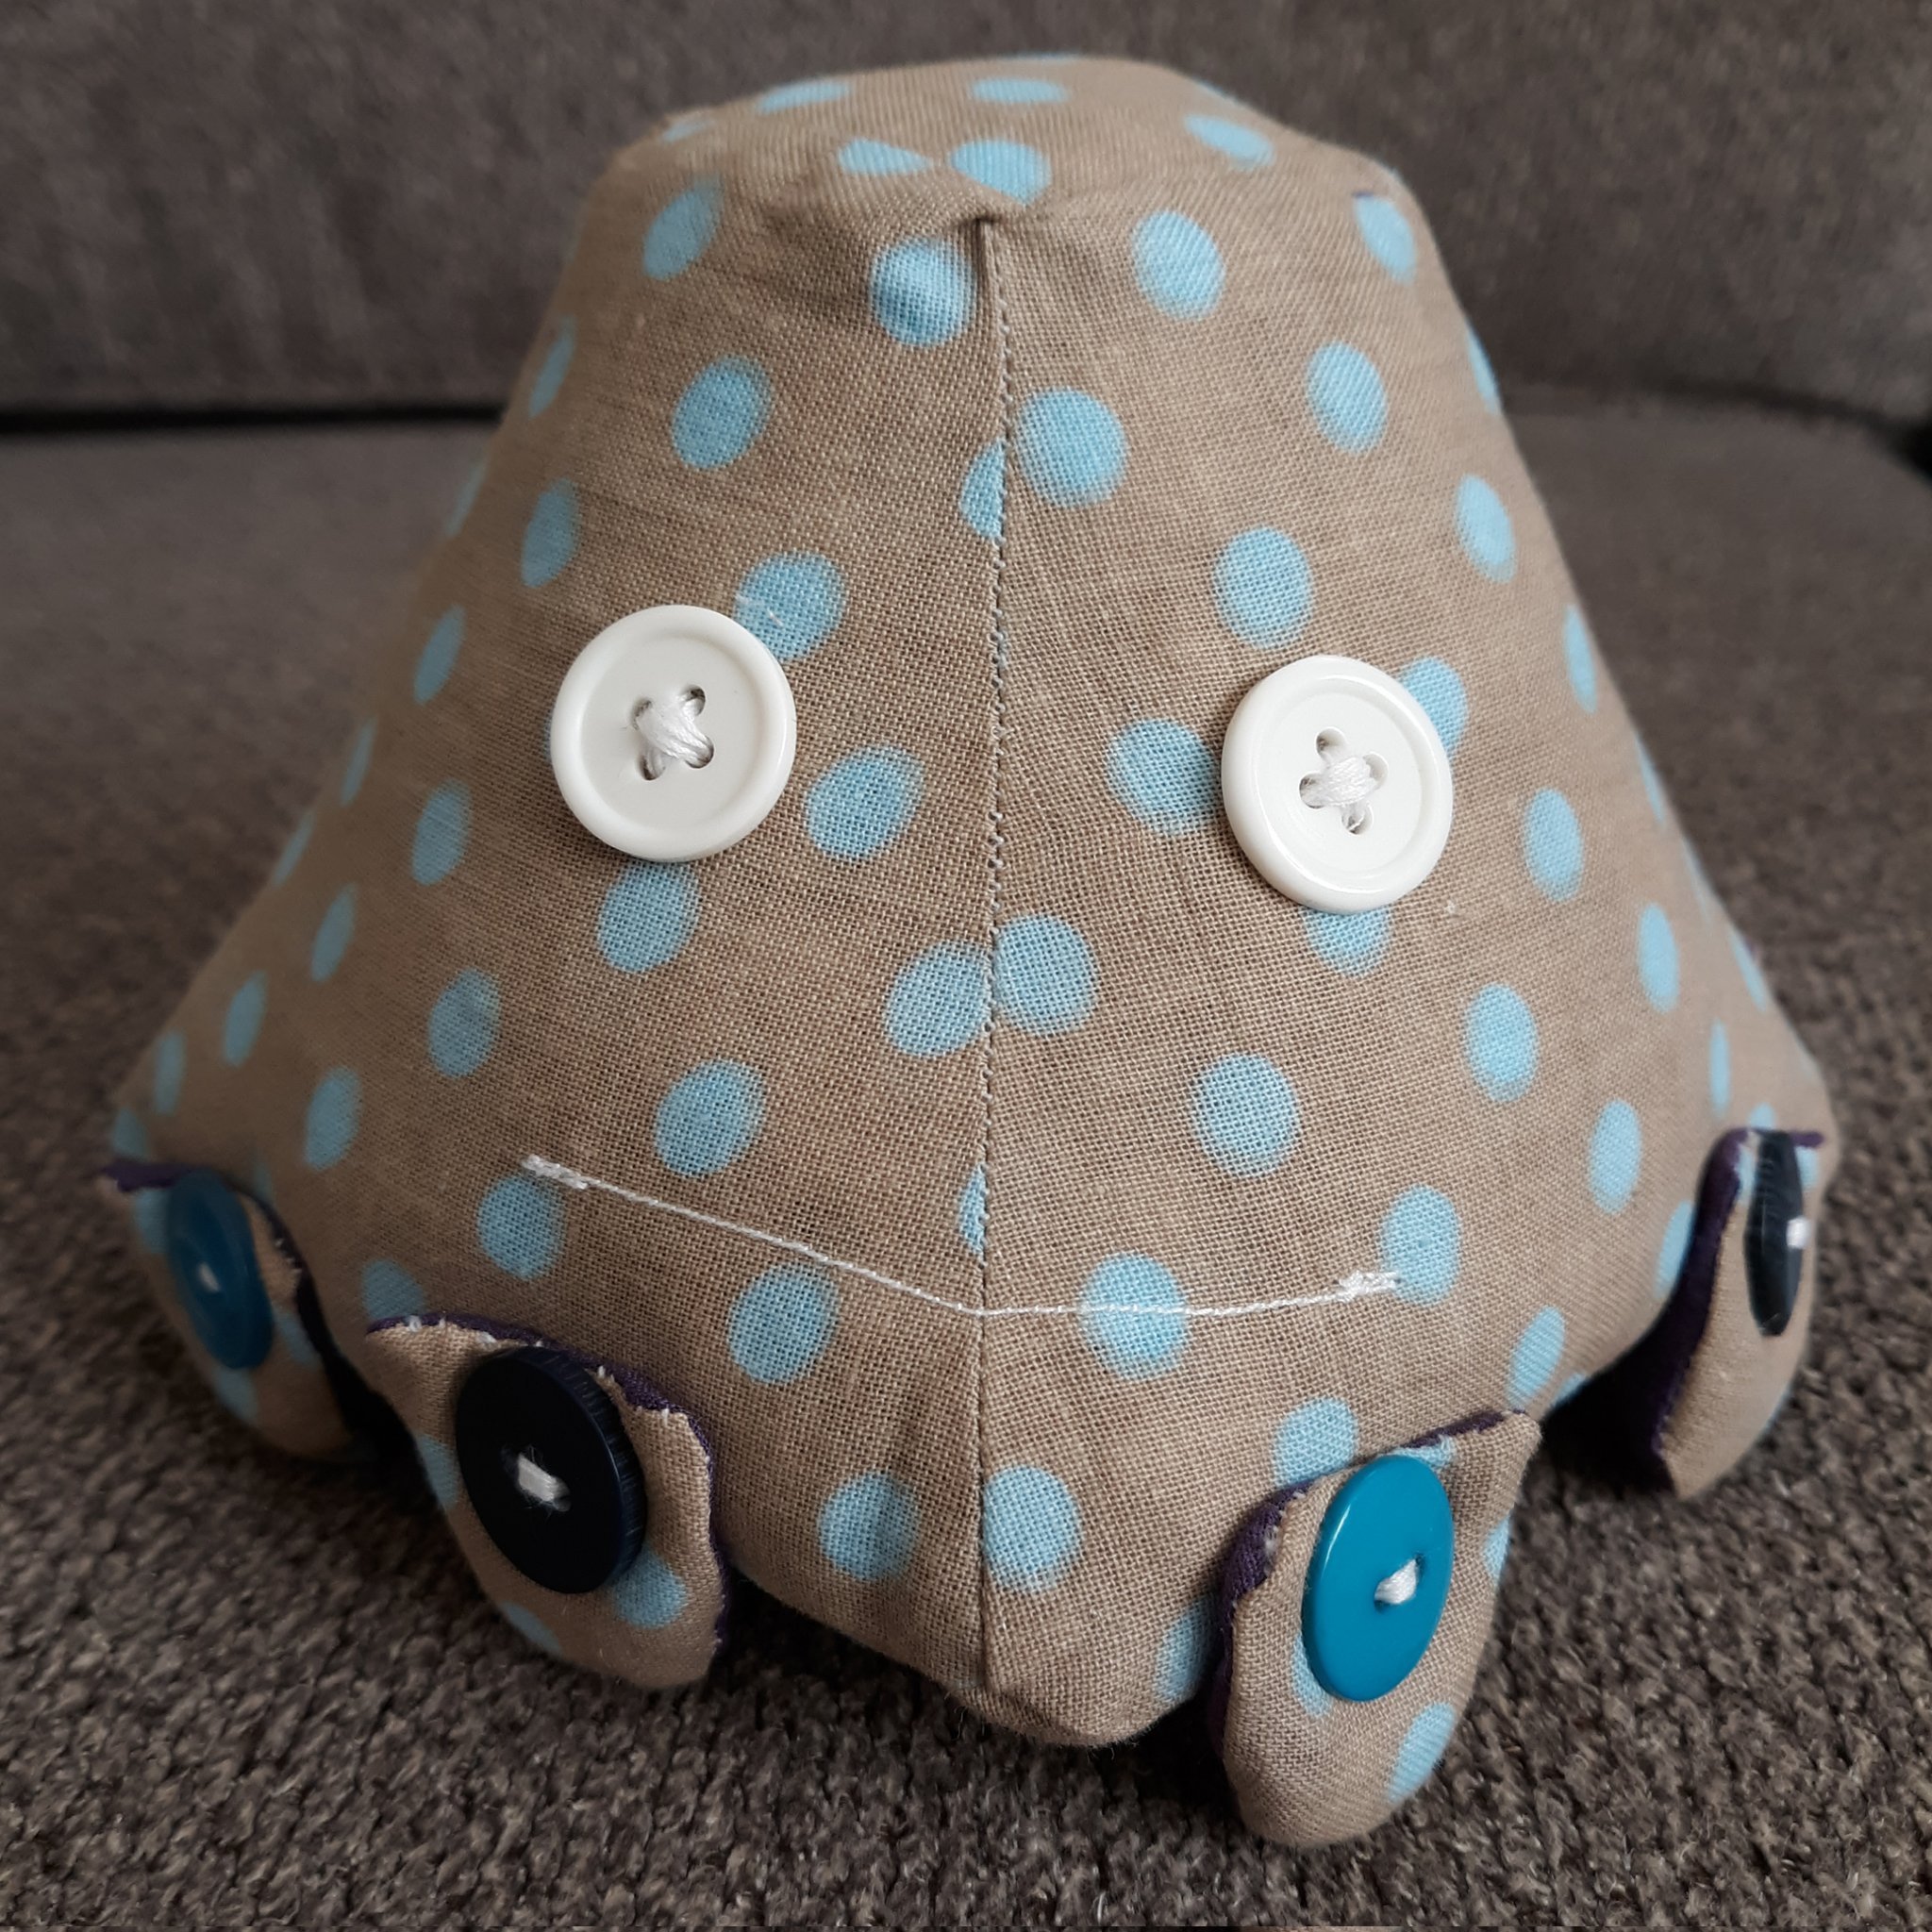 A small pyramid shaped doll. It has four different sides with a square top and square bottom. The body is of a brown fabric with blue dots on it. The eyes are made of two white buttons with a white mouth sewn onto it. The doll has eight legs, two on each face of the body, that are sewn on with blue buttons.